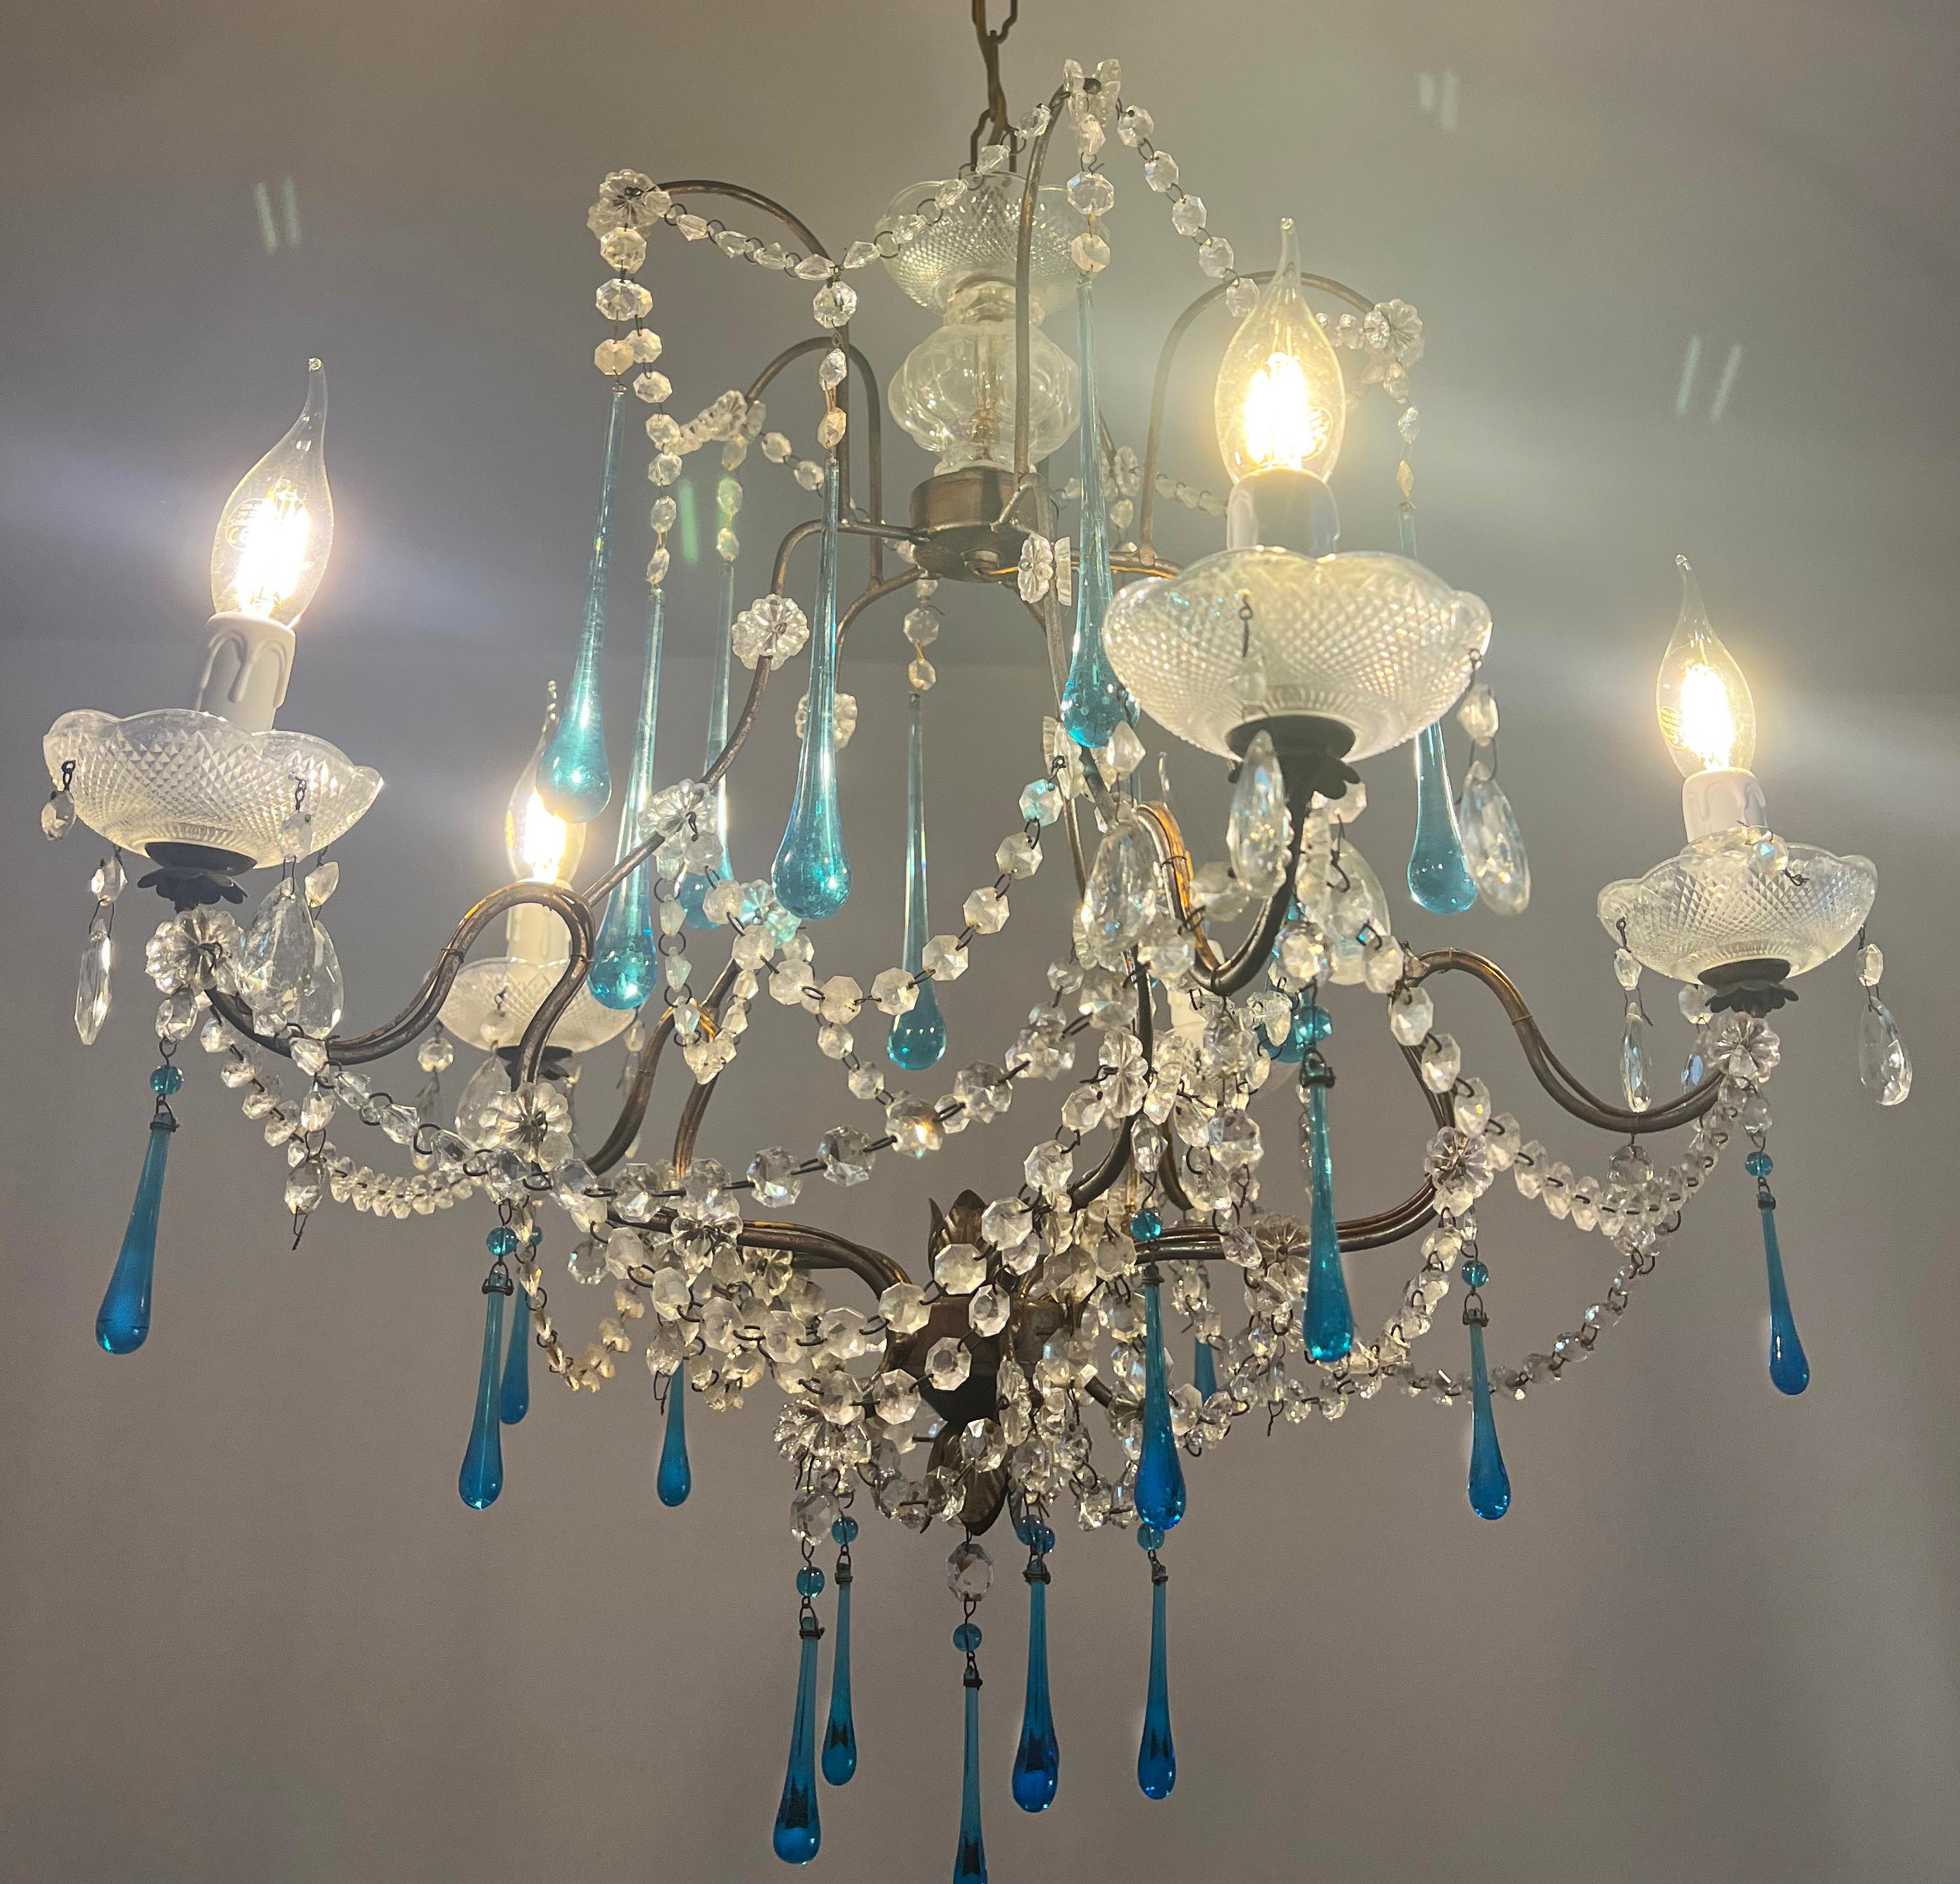 Fascinating Murano chandelier inspired by the divine Greta Garbo whose tears, legend has it, were the same color as her eyes.